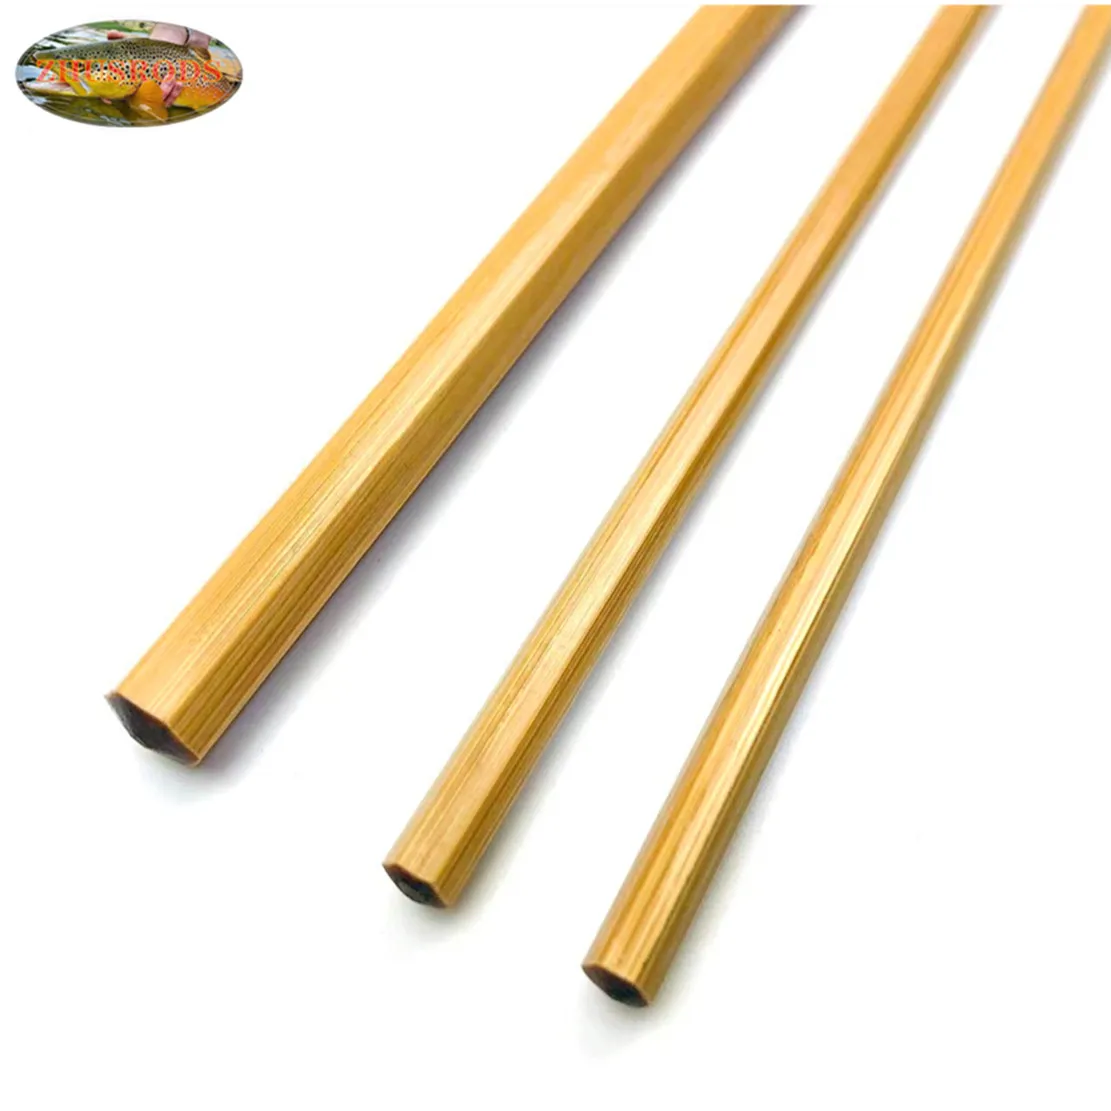 

ZHUSRODS Bamboo Fly Rod Blanks 2 Section 2 Tip (6'6"-8'0") And Nickel Silver Ferrule / Handmade Fly Fishing Rod Blanks